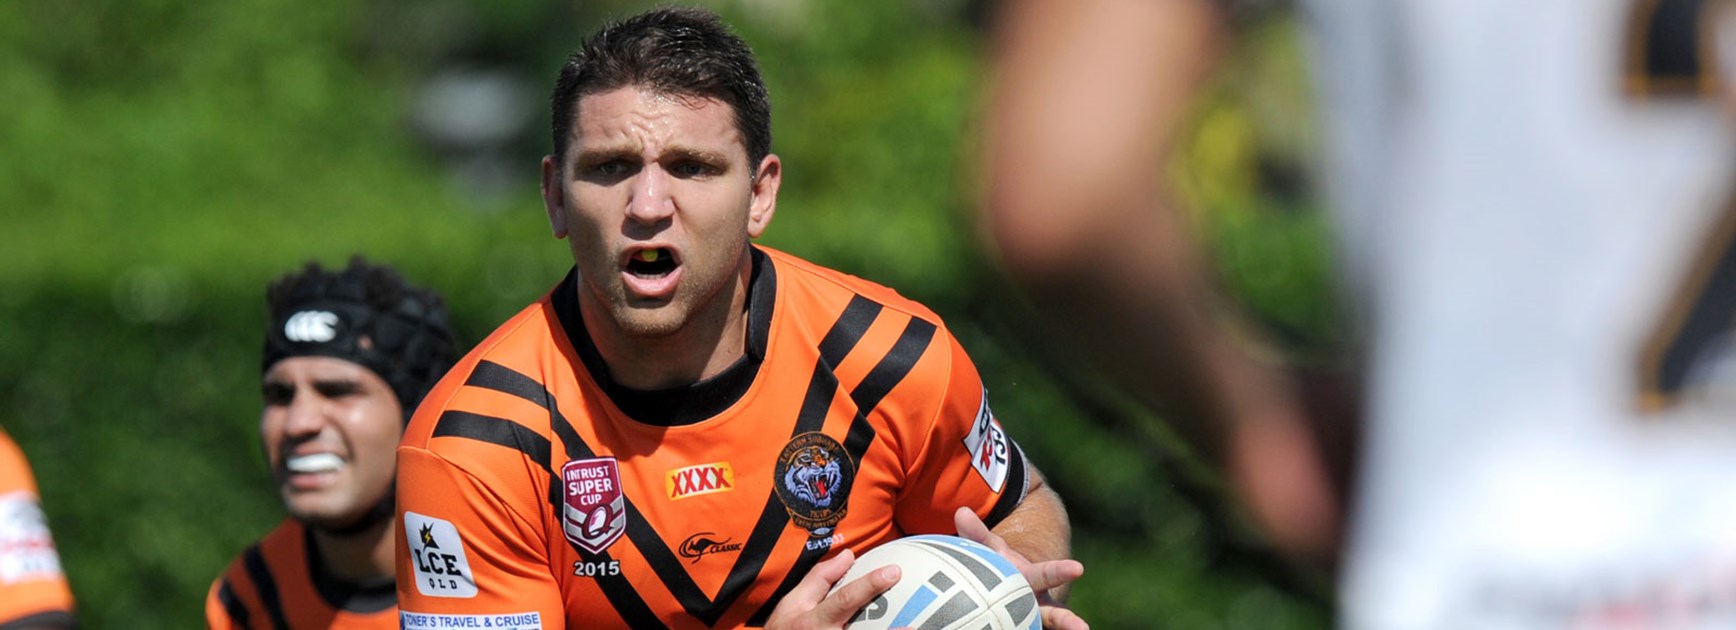 The addition of former Bulldog and Raider Jake Foster has helped Easts Tigers get off to a strong start.